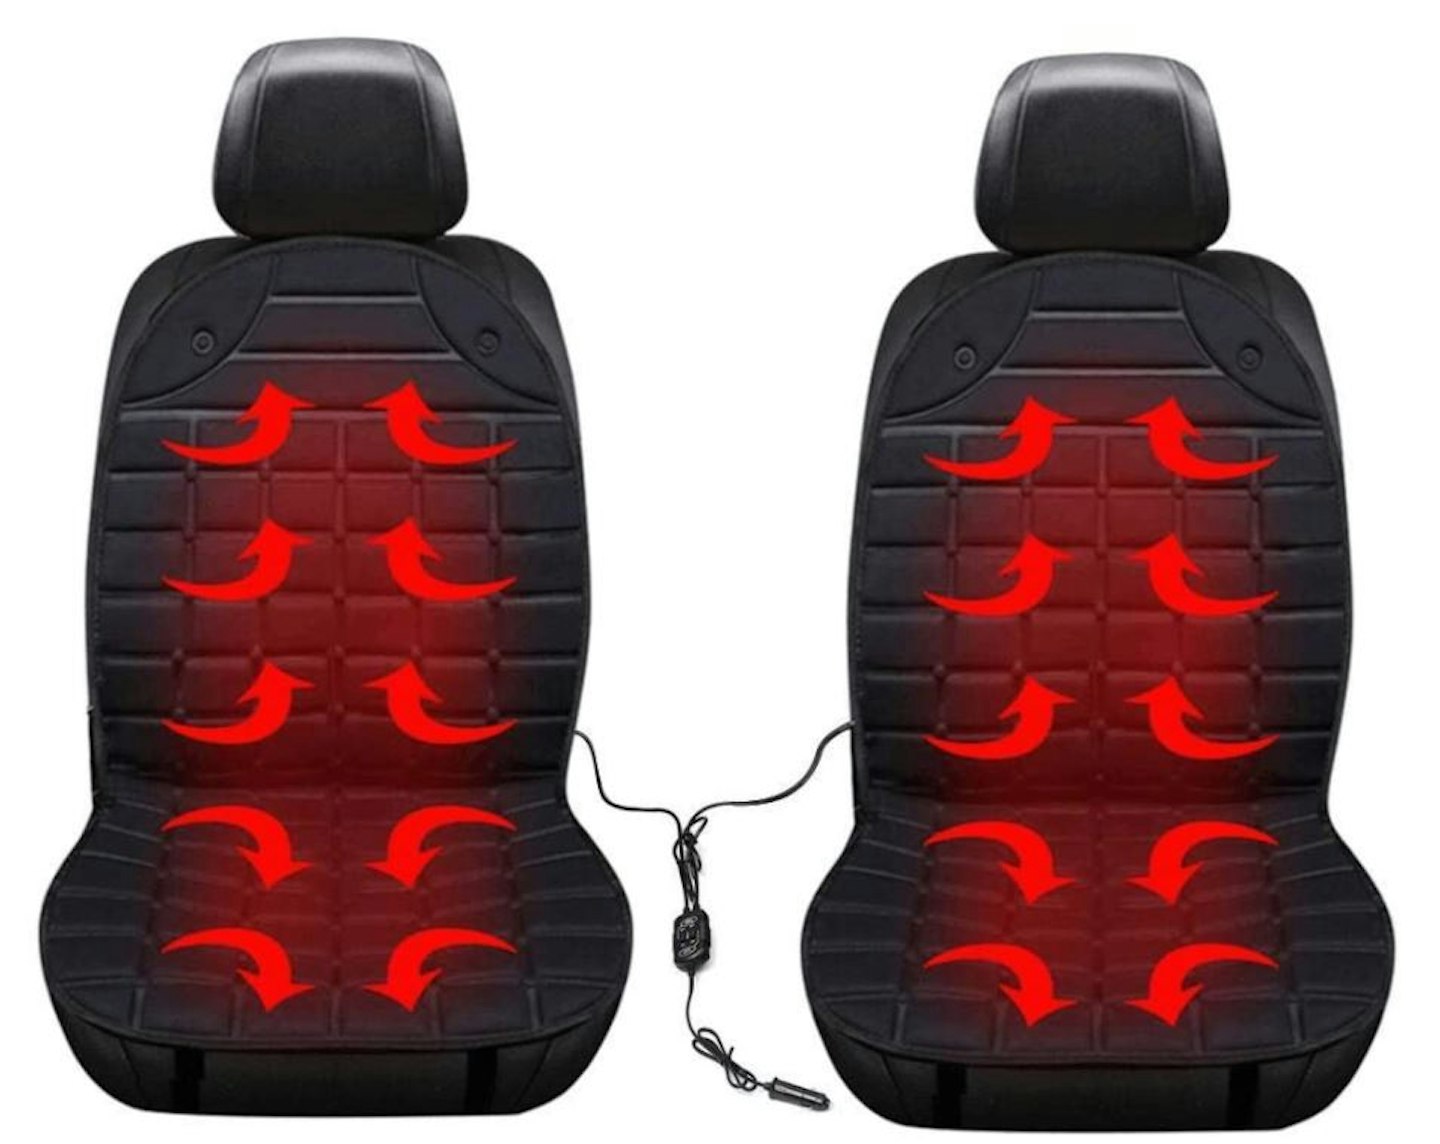 CAR's Recommended Heated Car Seat Covers